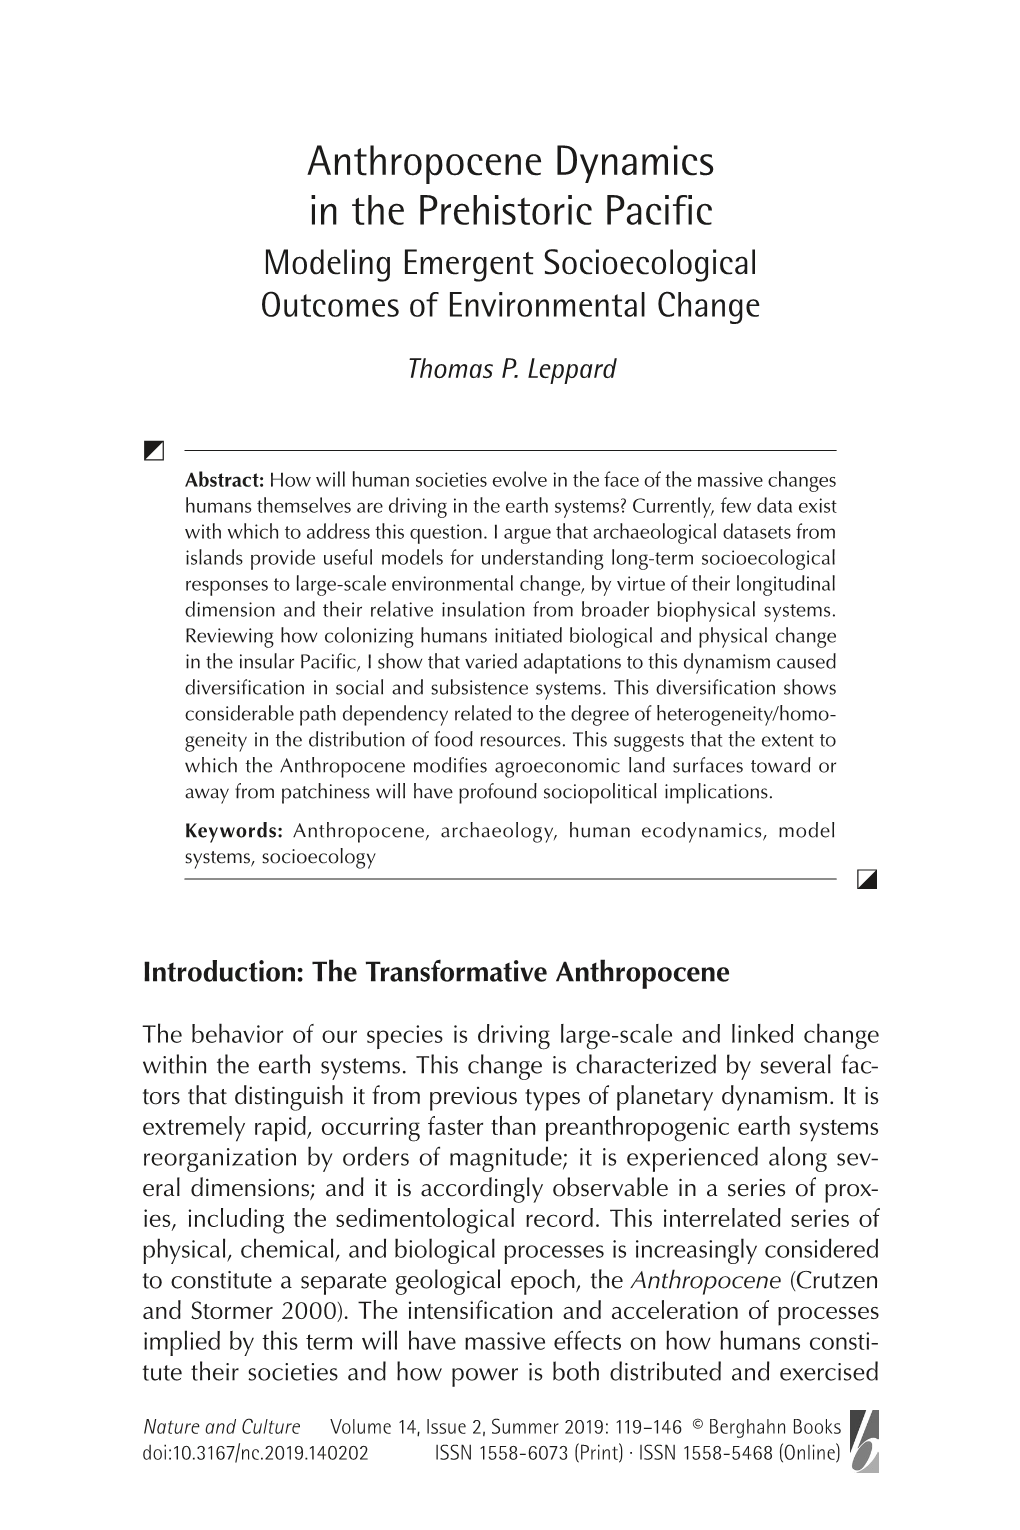 Anthropocene Dynamics in the Prehistoric Pacific Modeling Emergent Socioecological Outcomes of Environmental Change